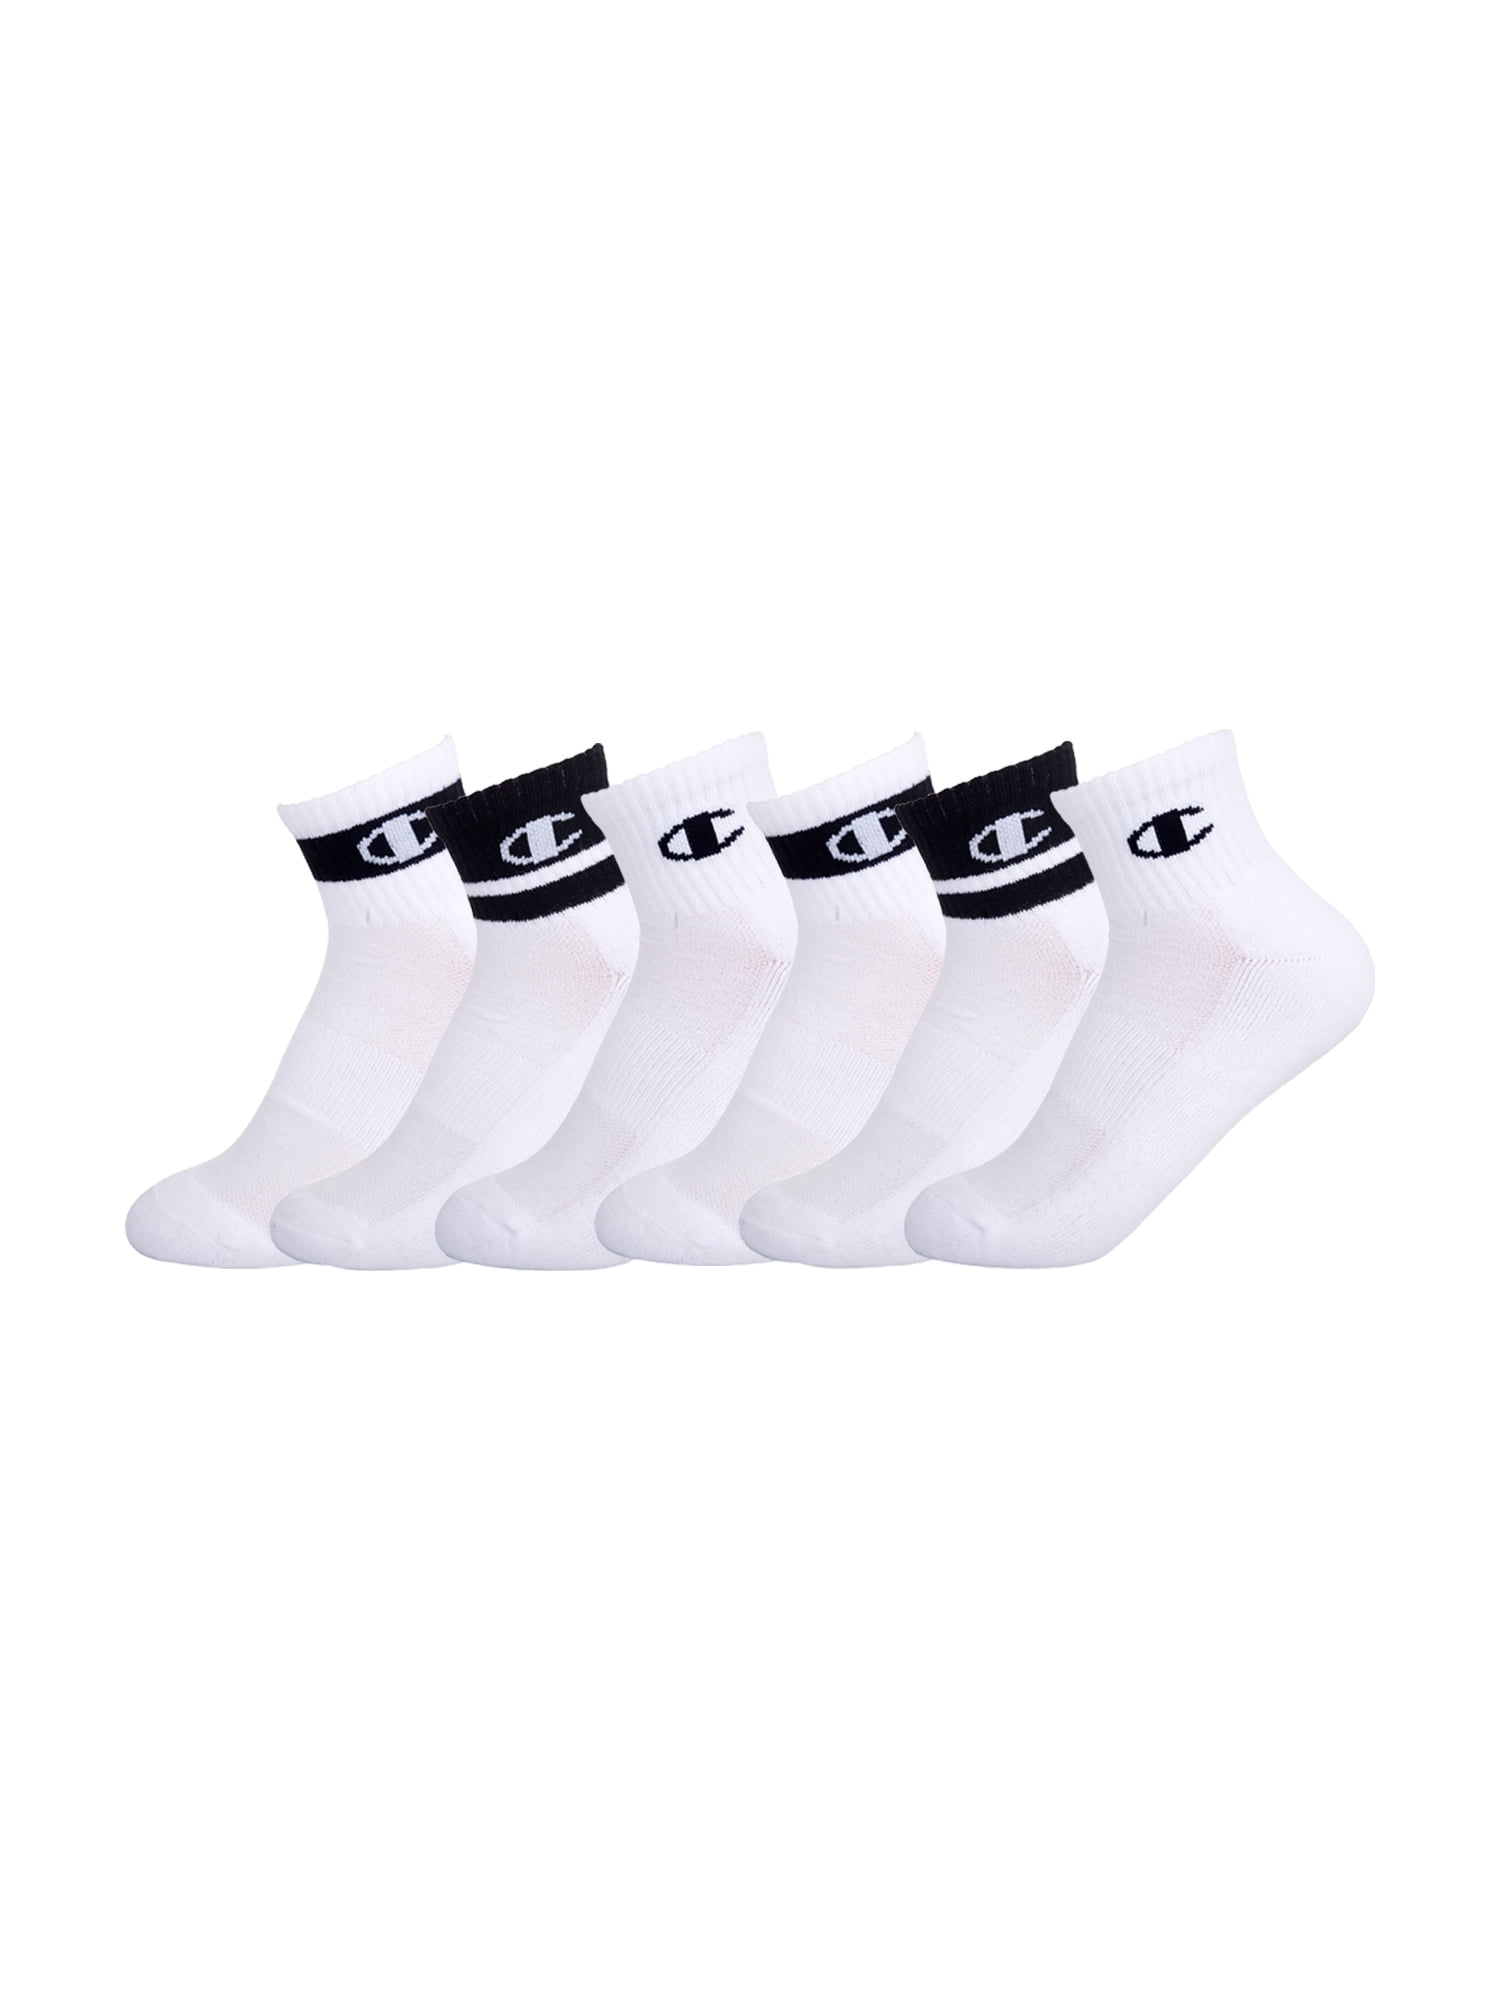 Black And White Checked Ankle Socks Size: 4-7